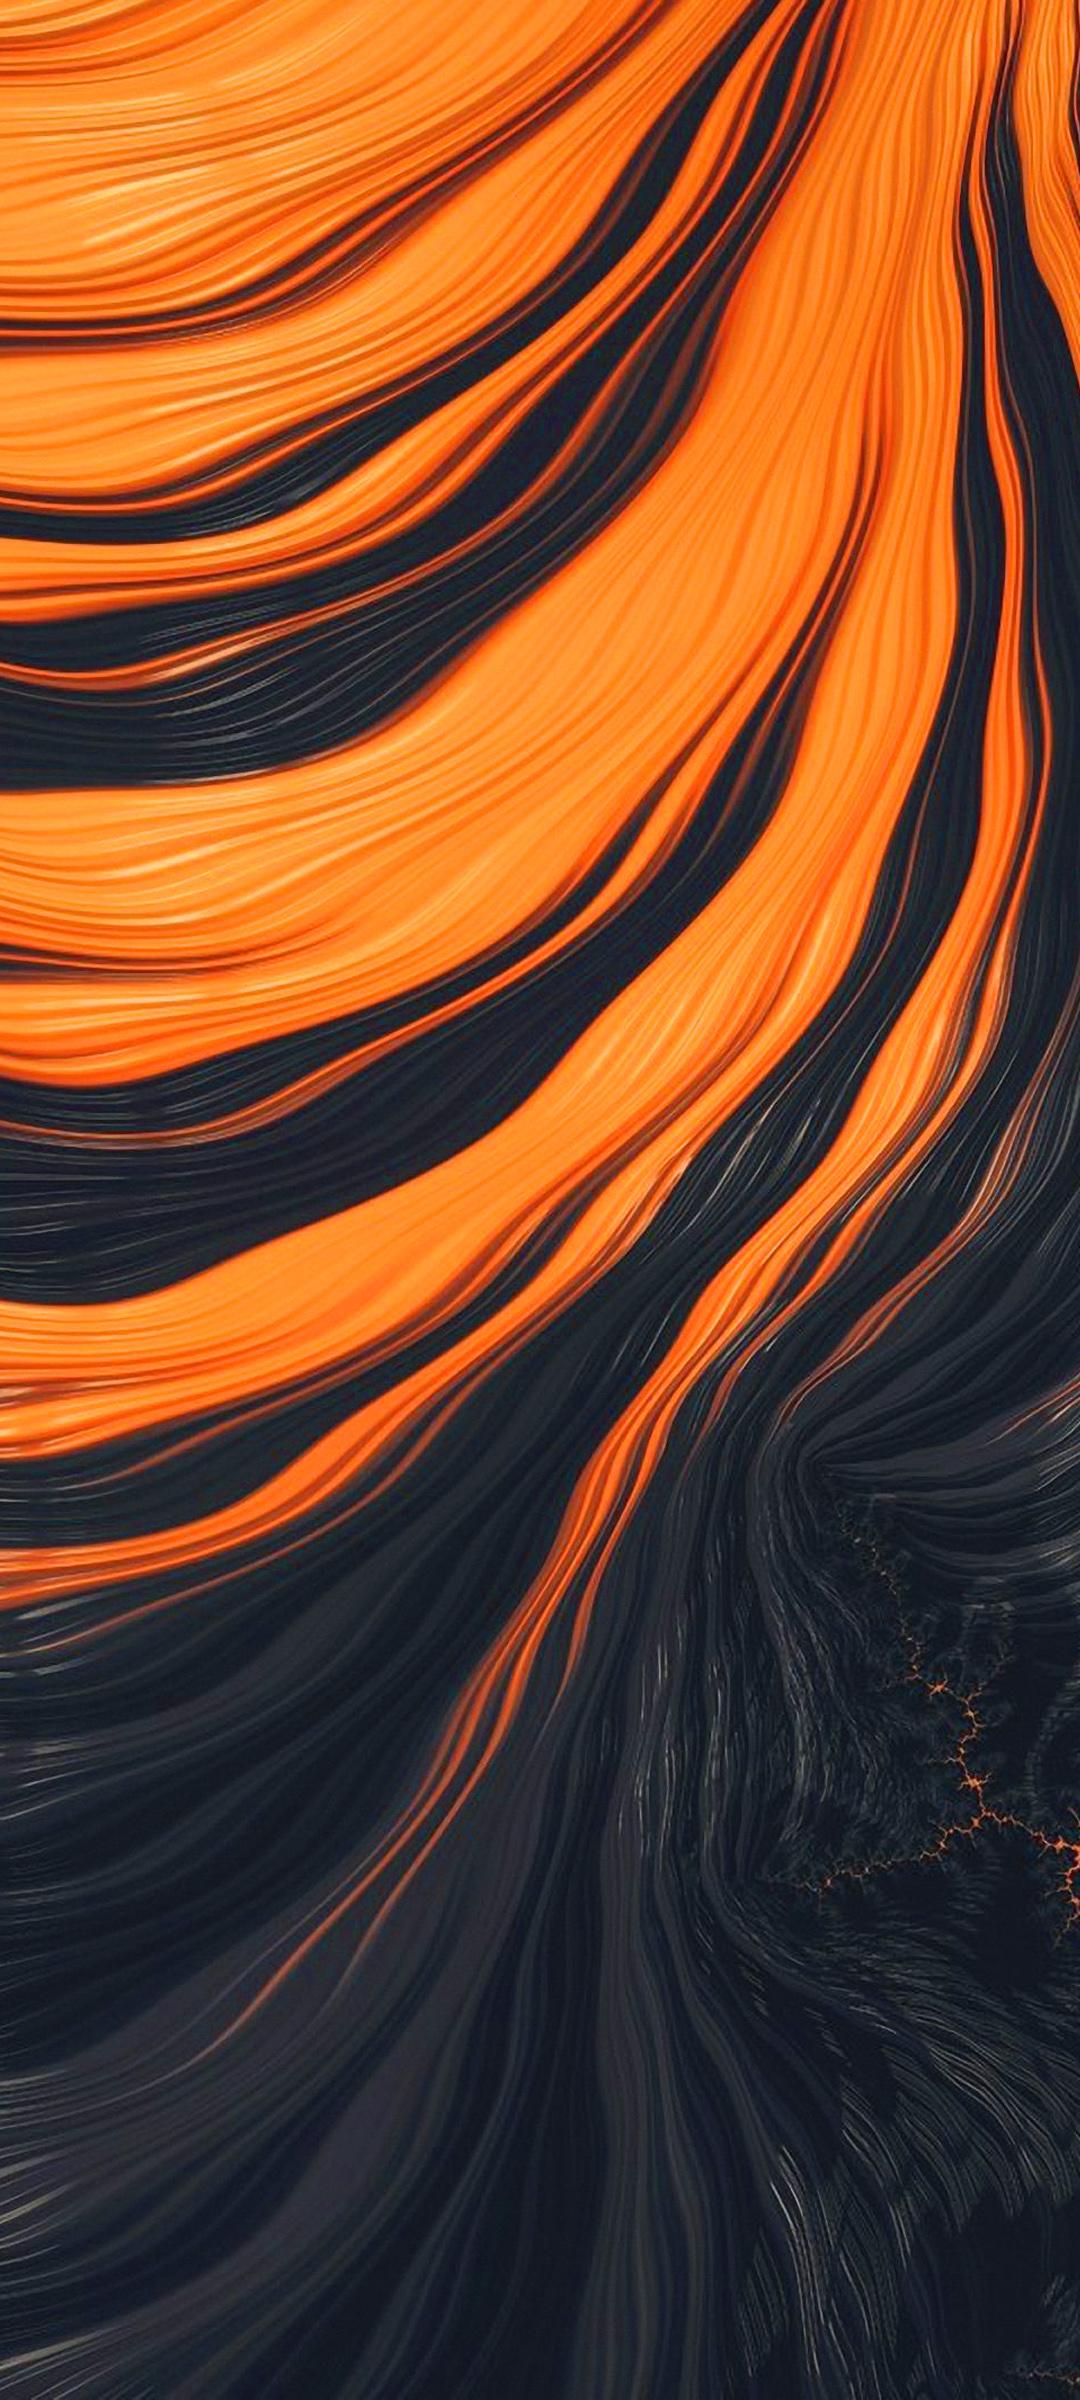 Black and Orange Abstract iPhone Wallpapers - Top Free Black and Orange ...